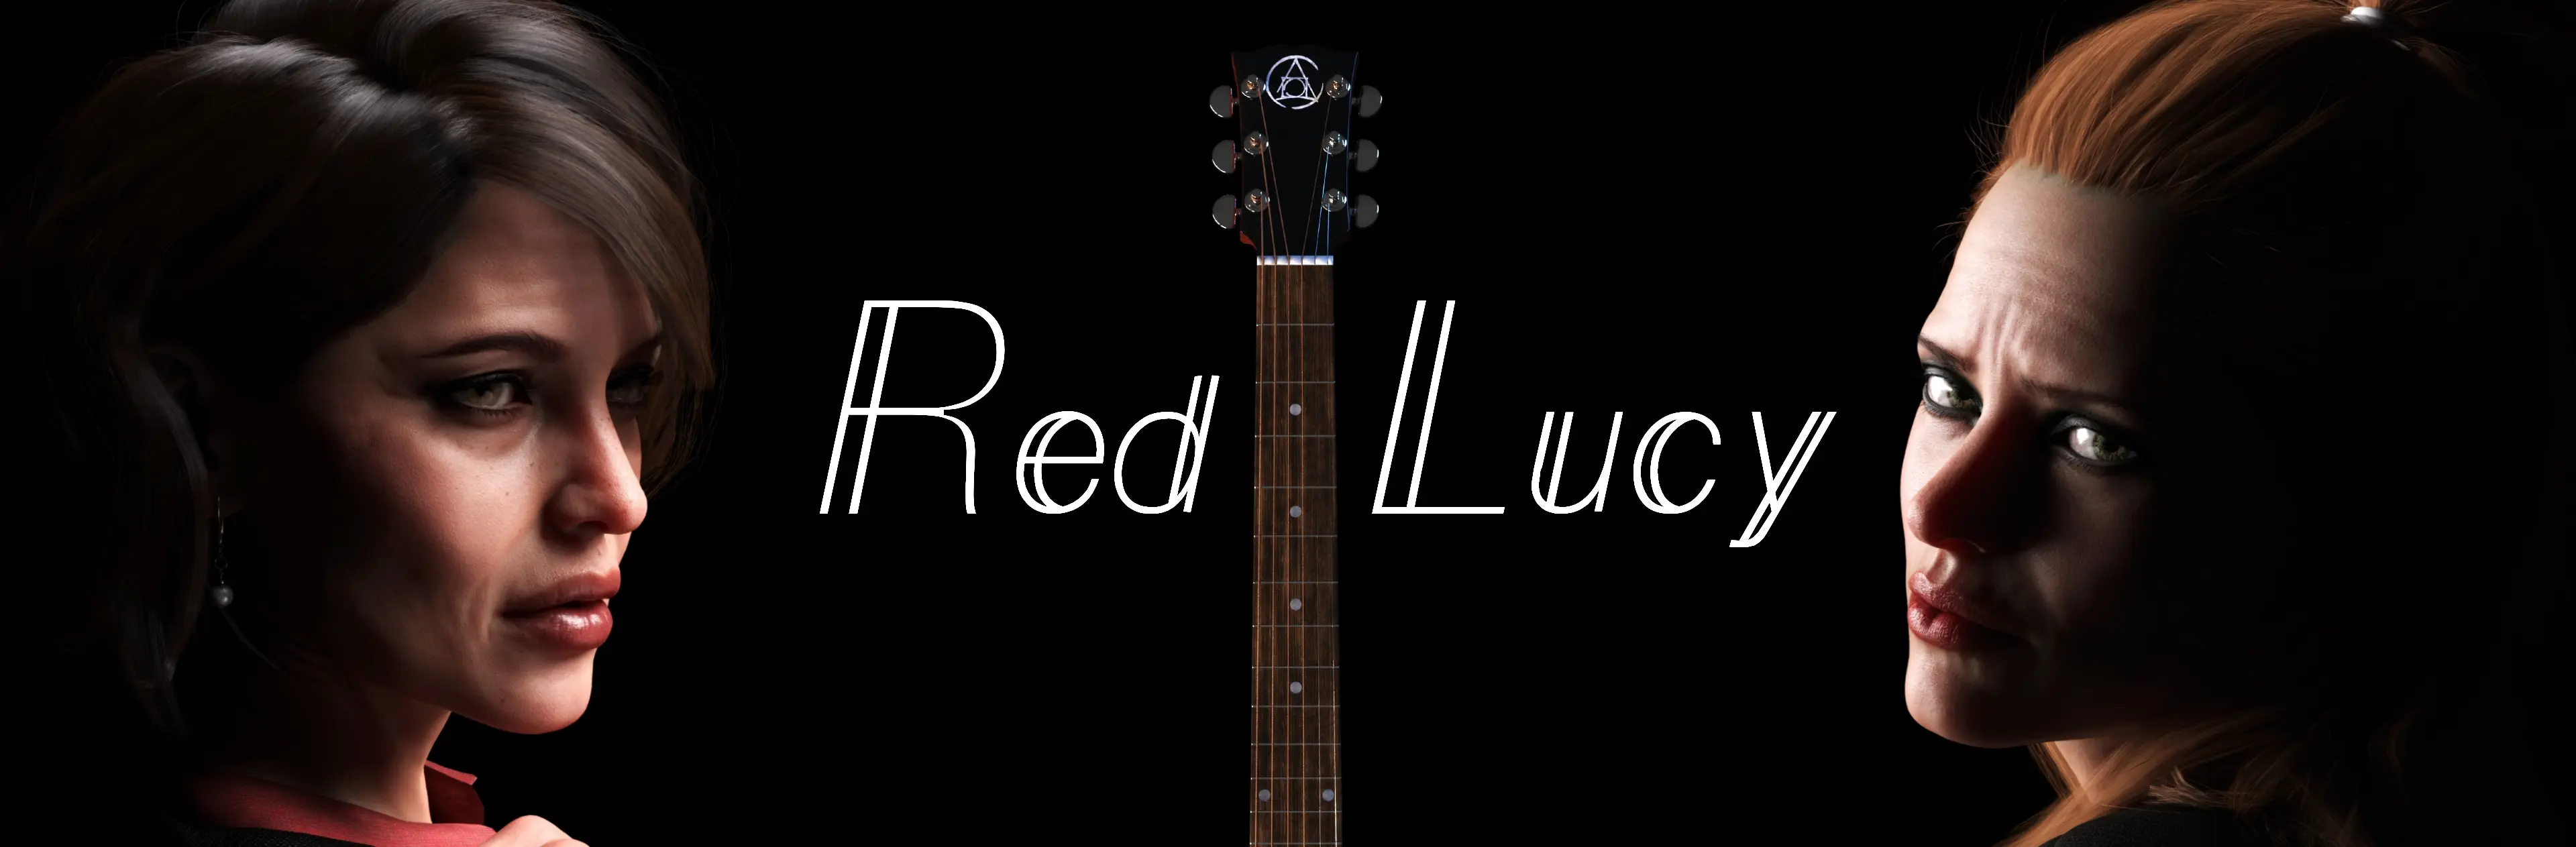 Red Lucy [v0.1] main image